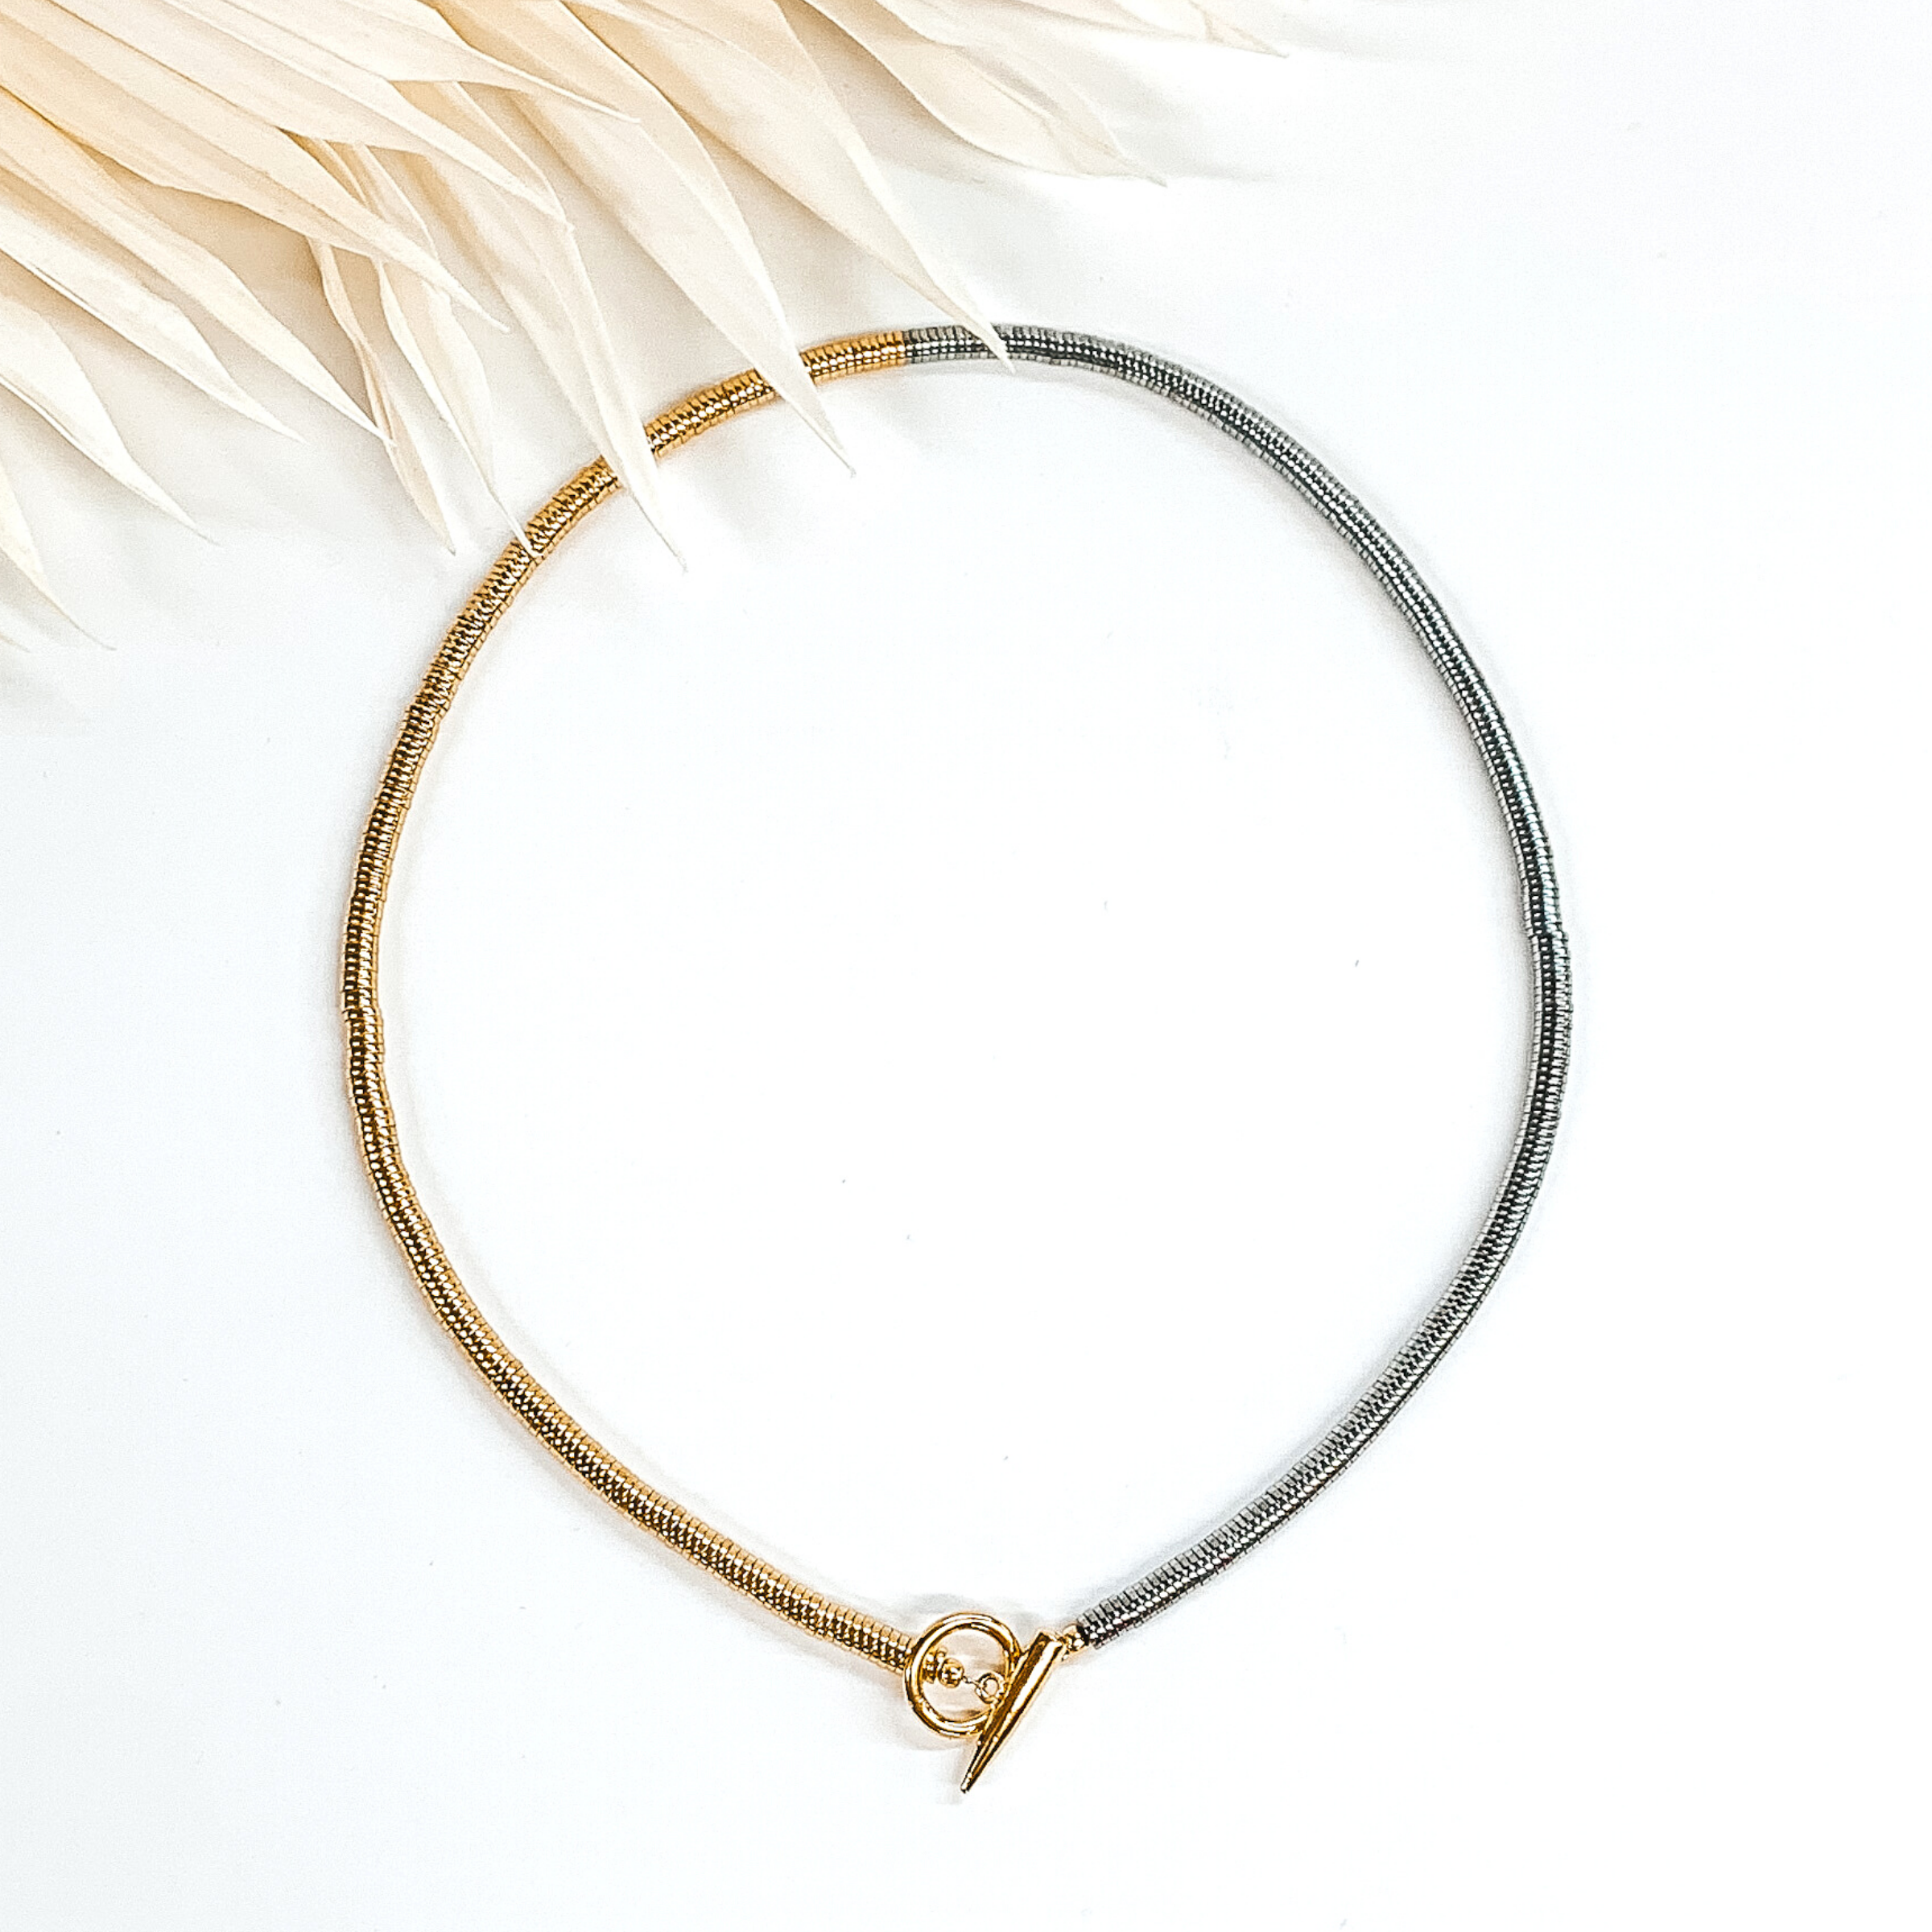 Gold and silver disk beaded necklace with front toggle clasp. This necklace is pictured on a white background with ivory leaves at the top.